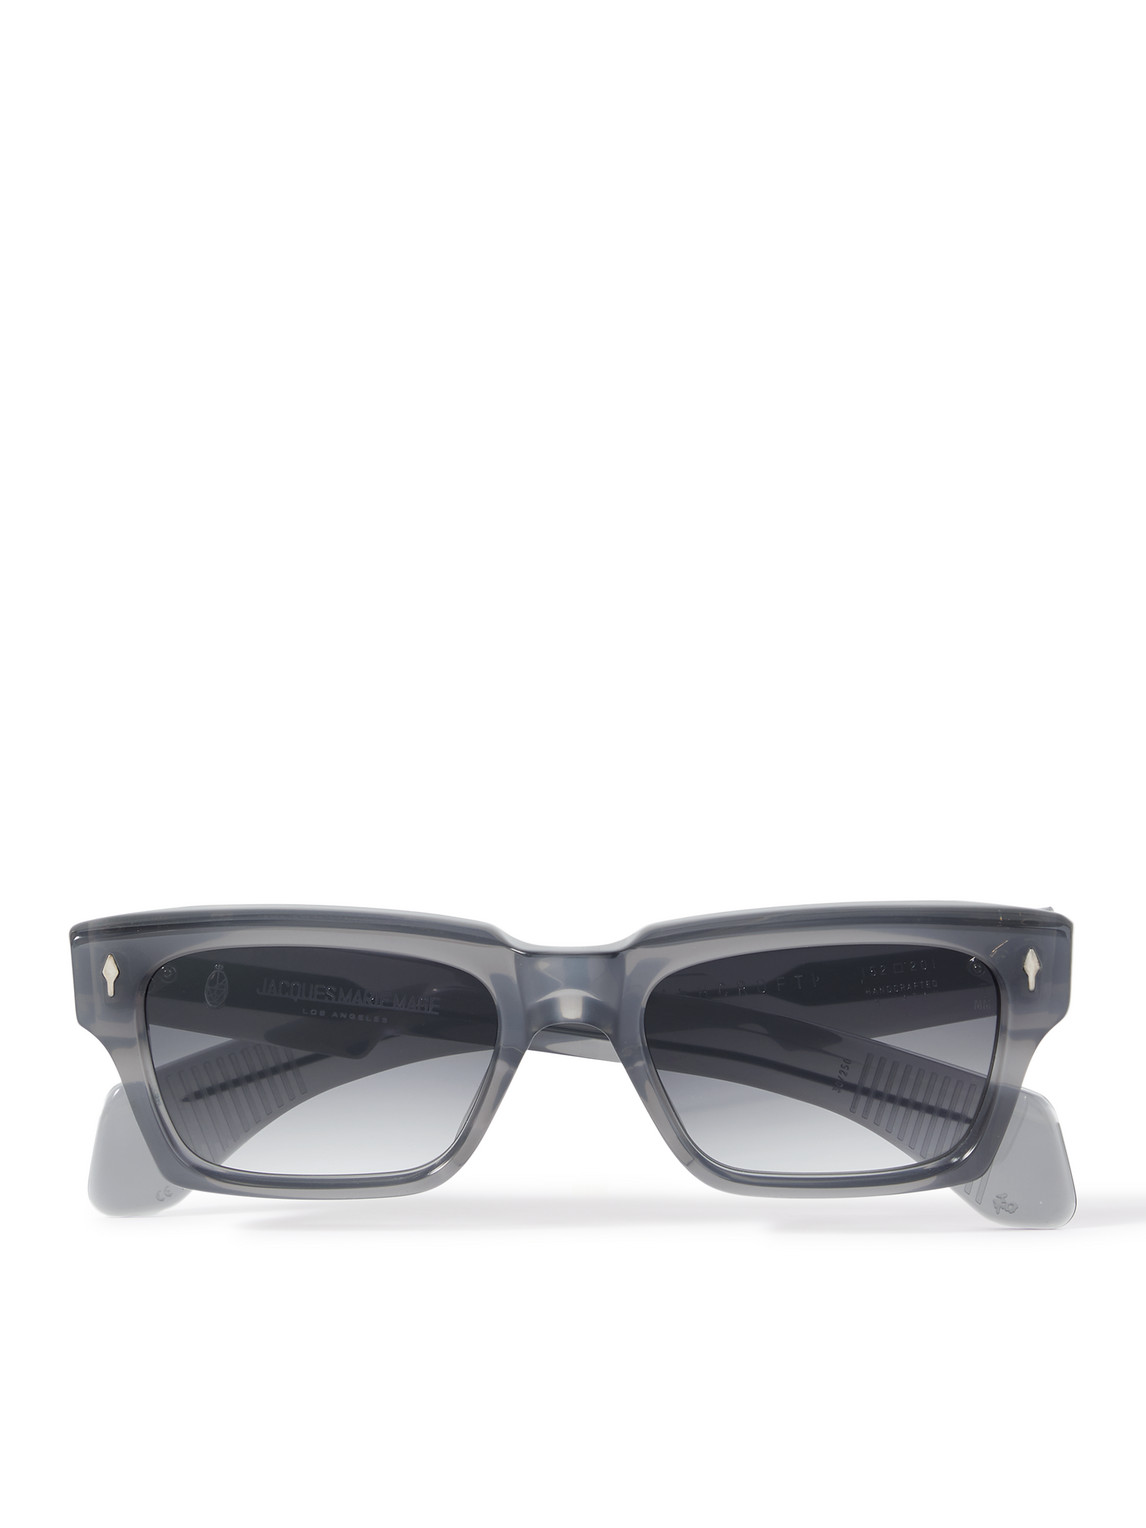 Jacques Marie Mage Ashcroft Rectangular-frame Acetate And Silver-tone Sunglasses In Grey